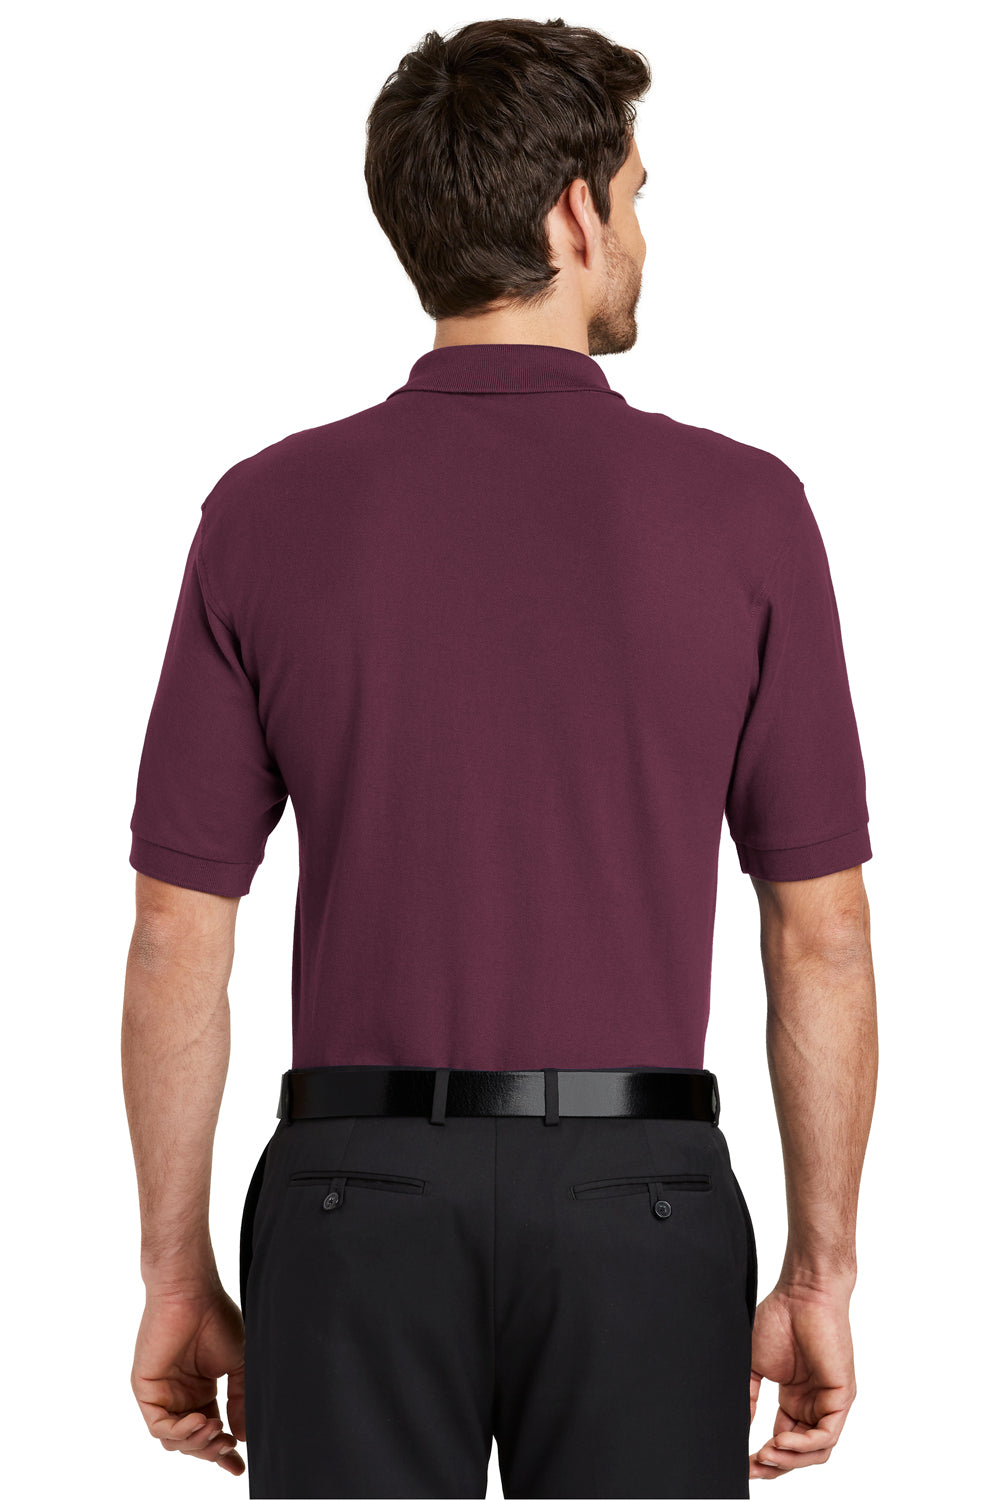 Port Authority K500 Mens Silk Touch Wrinkle Resistant Short Sleeve Polo Shirt Maroon Back